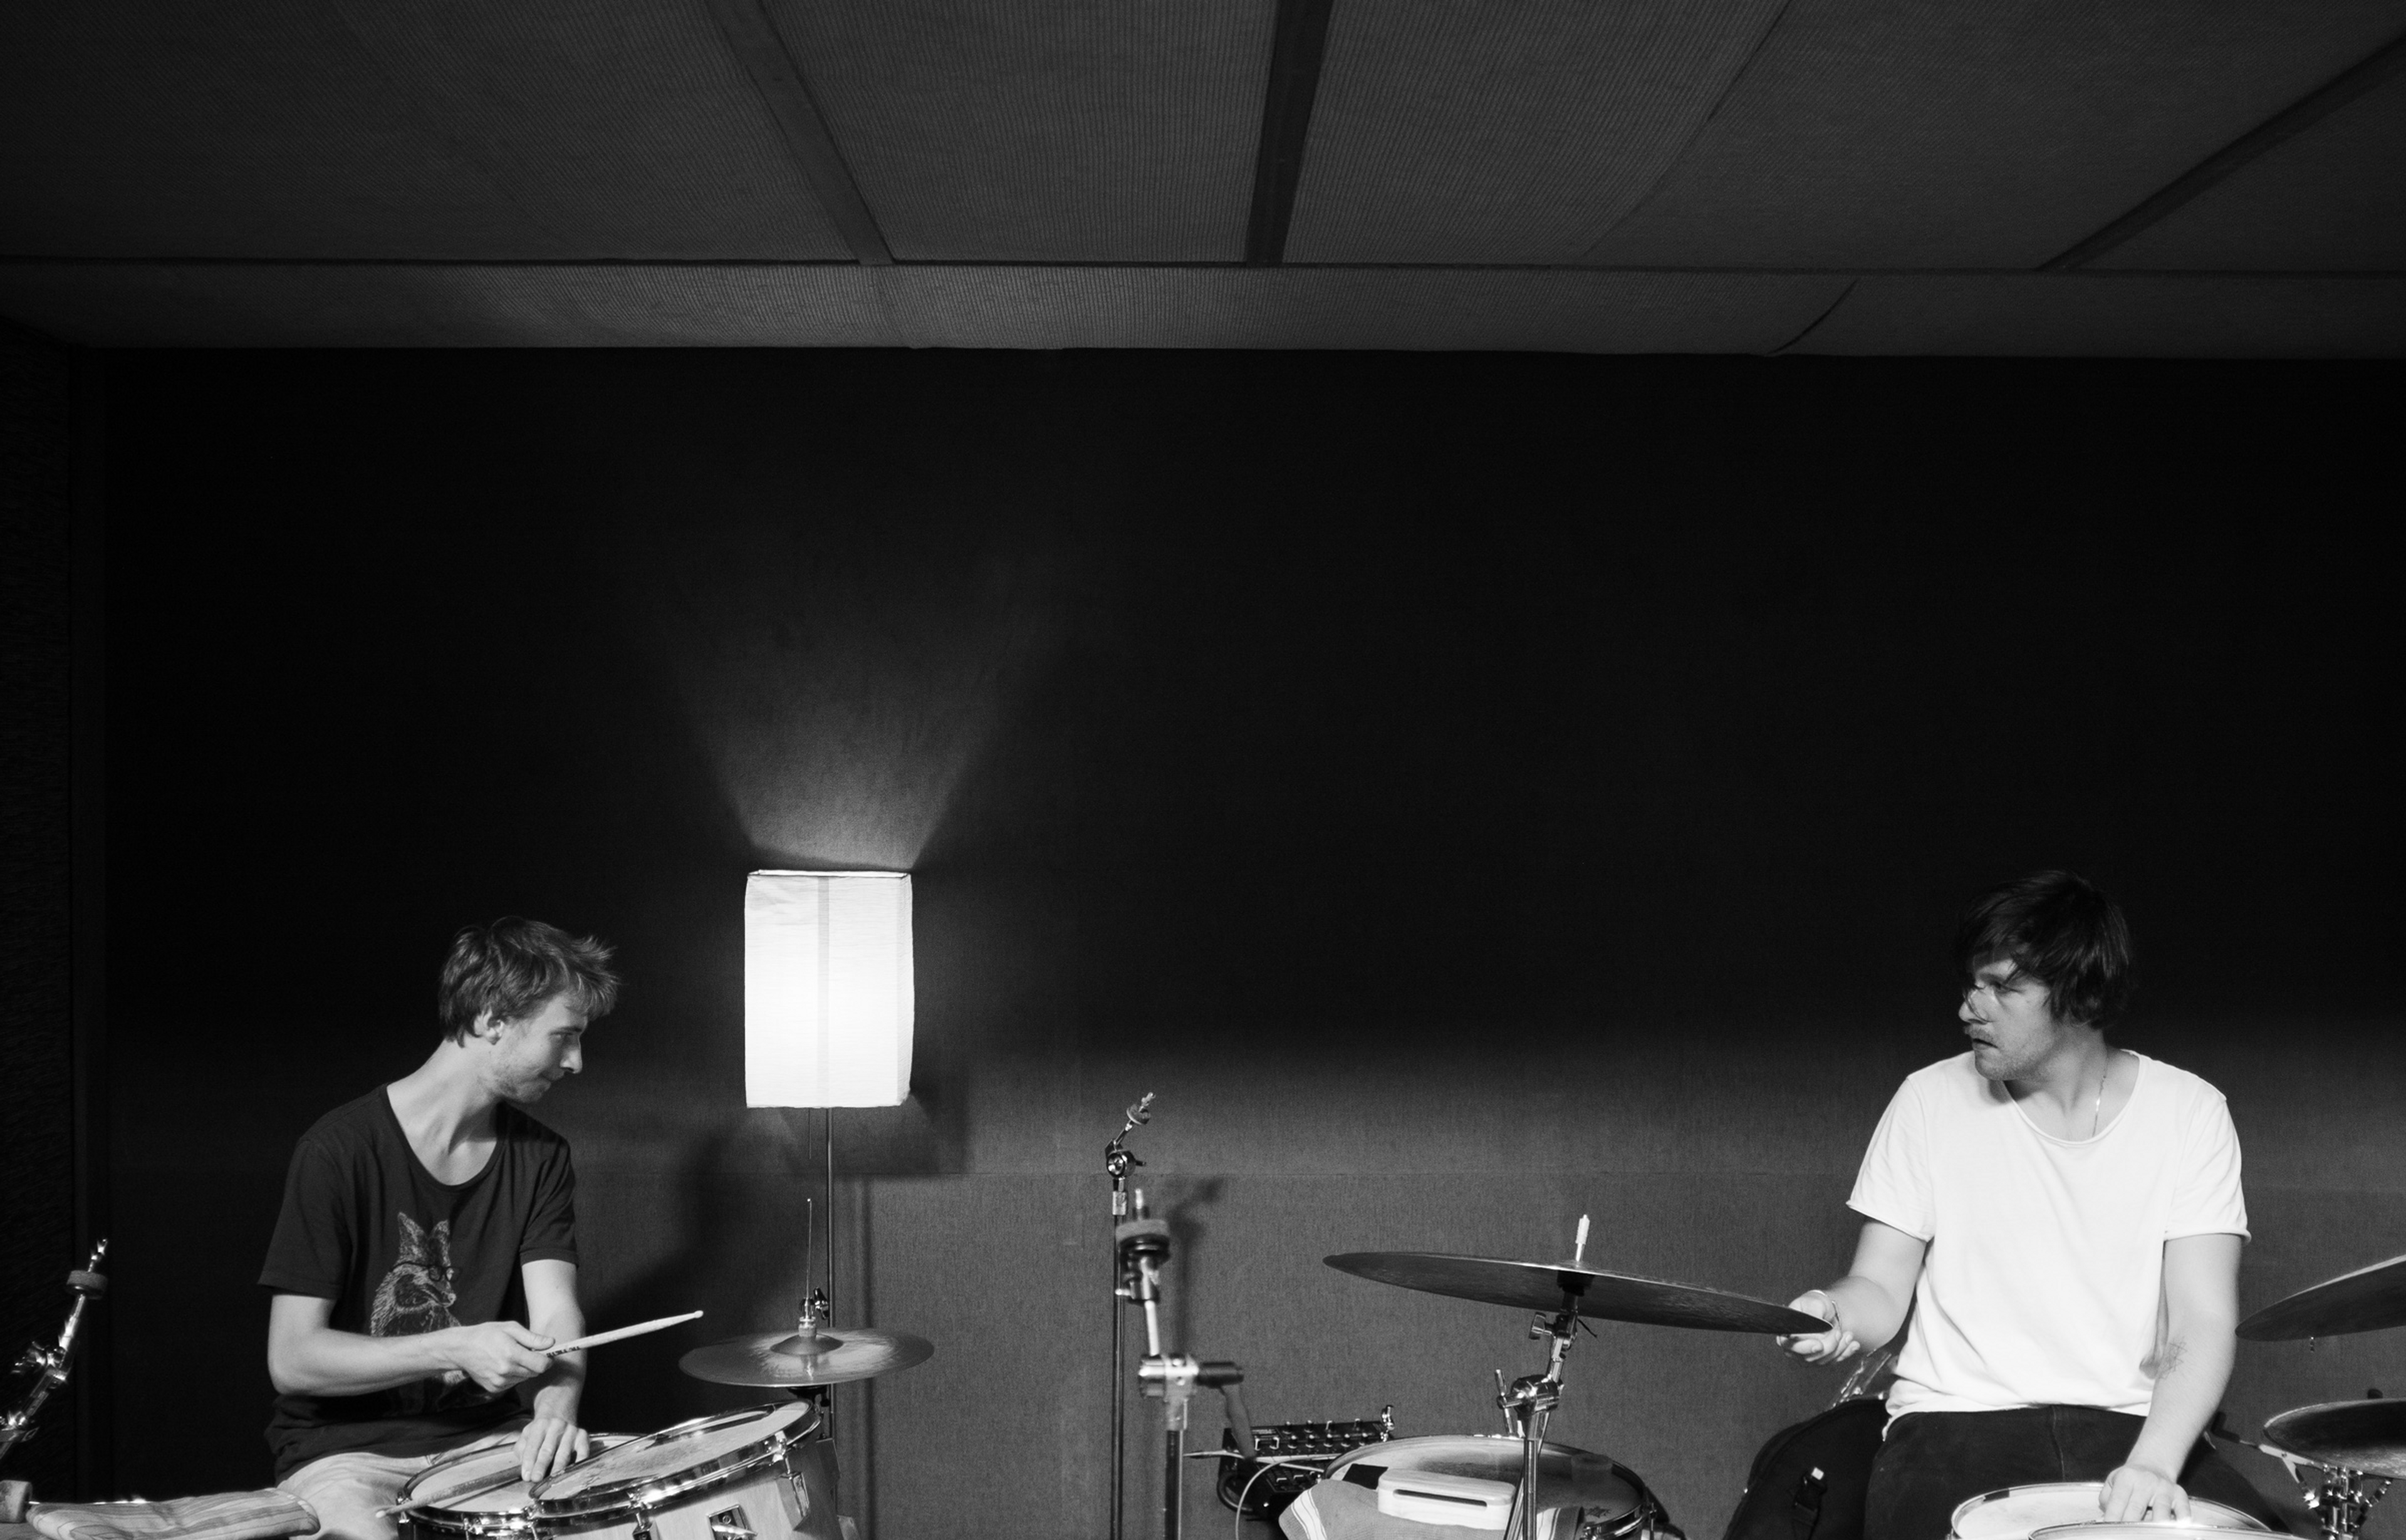 Simon Popp and Sebastian Wolfgruber playing drums at Fish Factory Studio in London